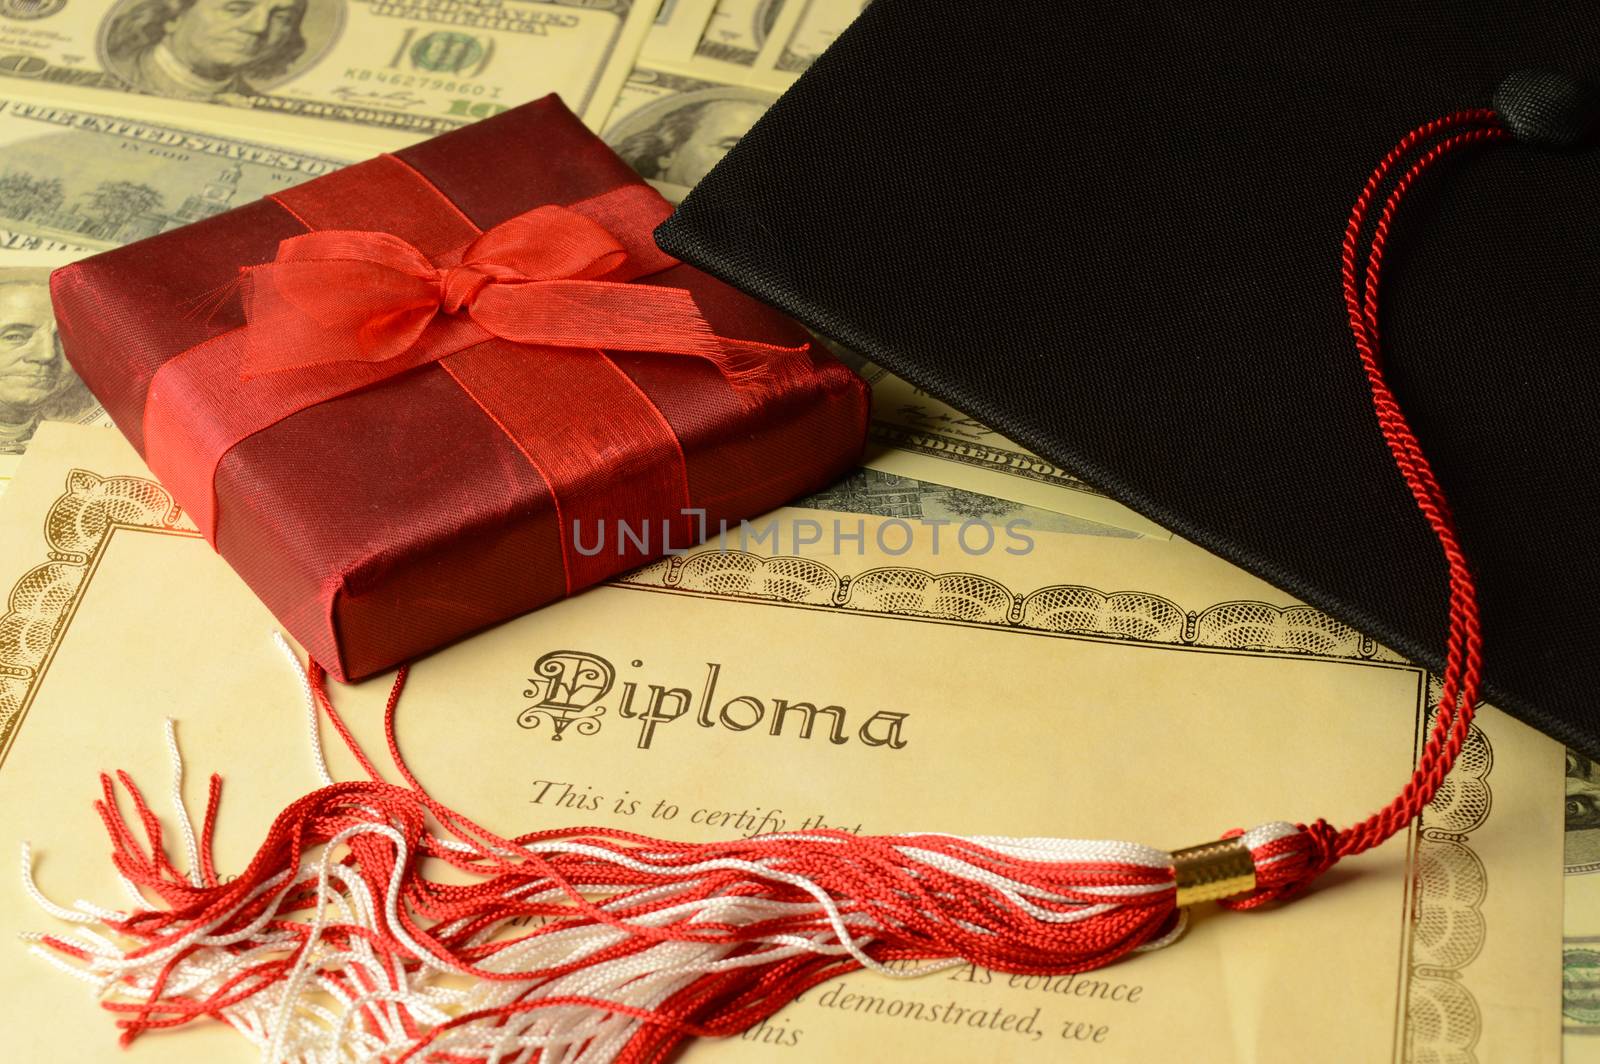 A red gift for the successful student during graduation time.